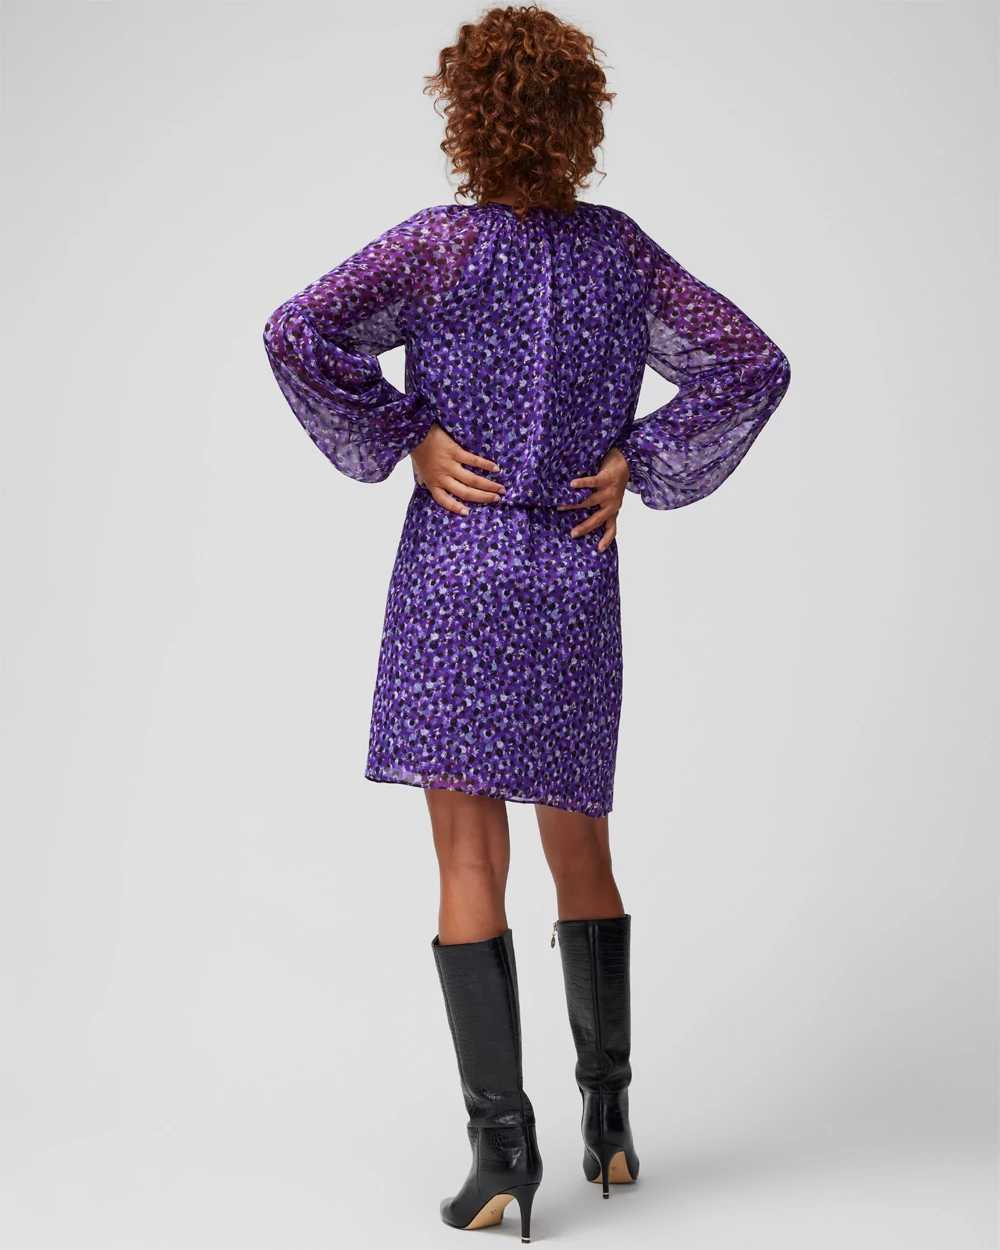 Long Sleeve Smocked Waist Blouson Dress click to view larger image.